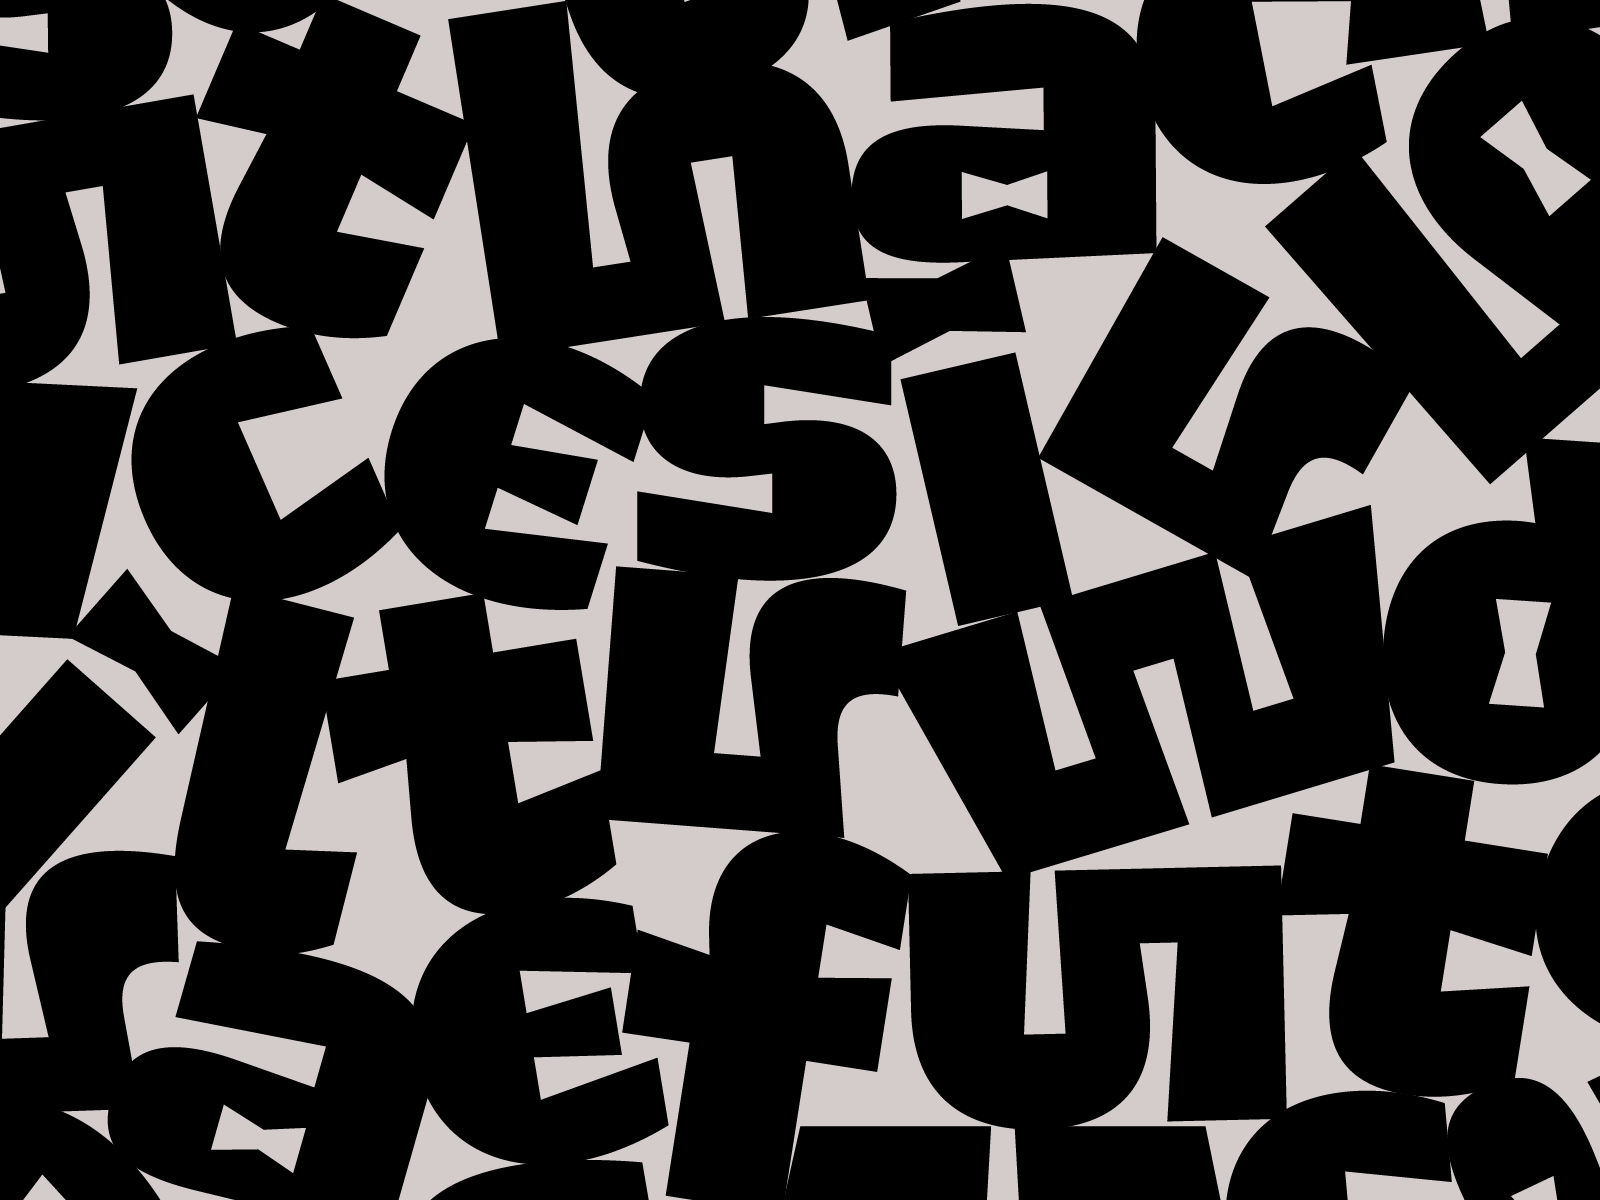 Weird letters by Type forward on Dribbble